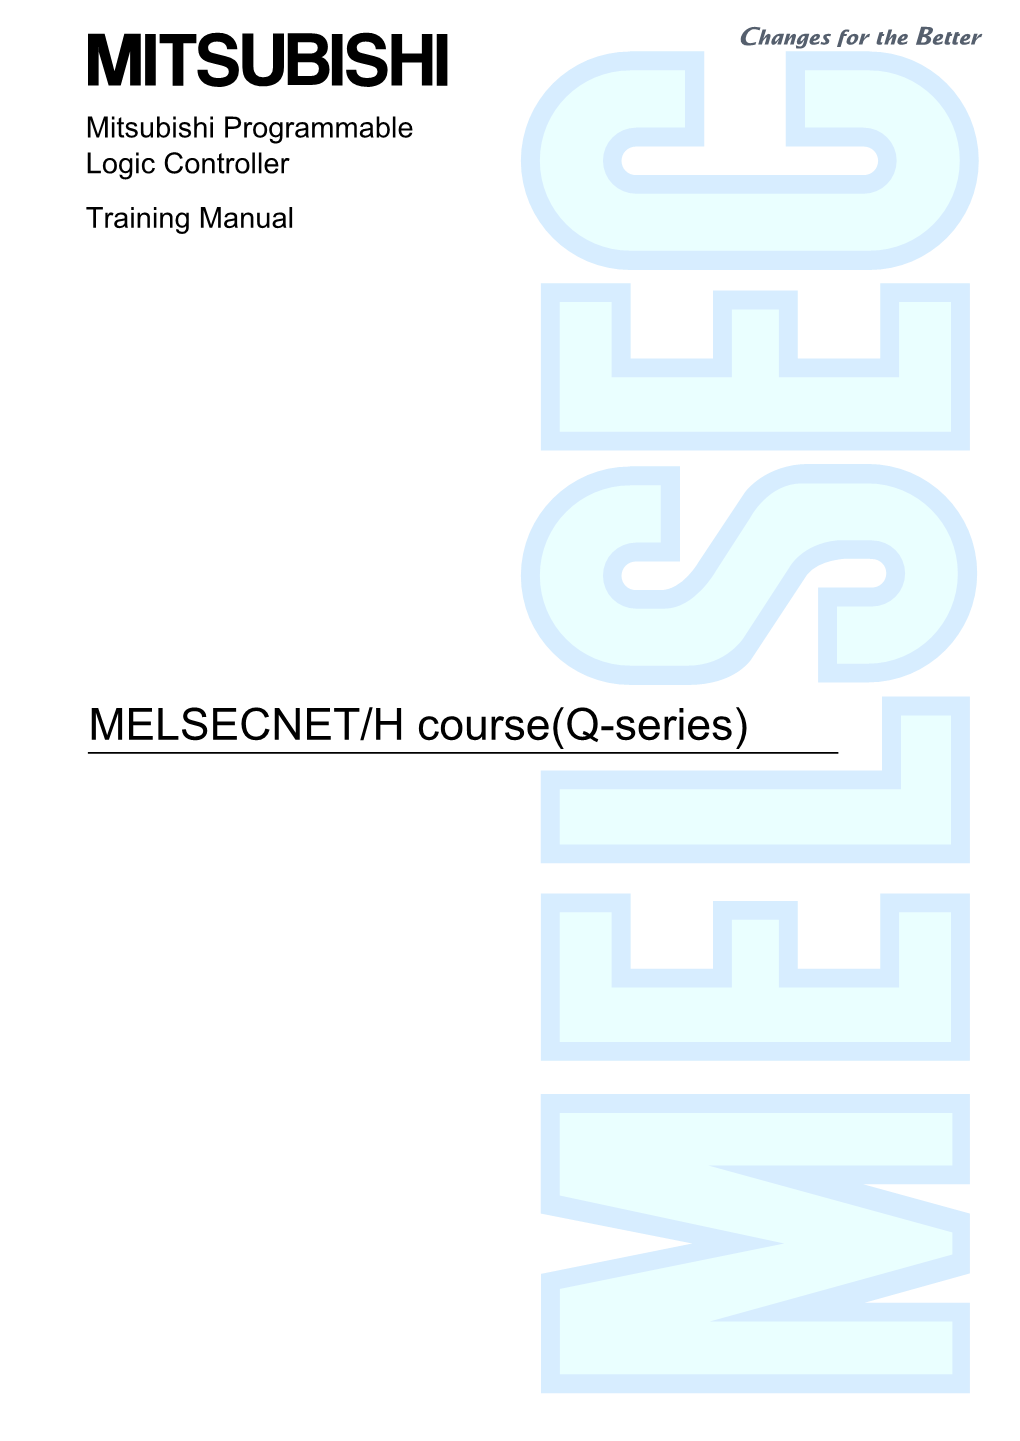 MELSECNET/H Course(Q-Series) Mitsubishi Programmable Logic Controller